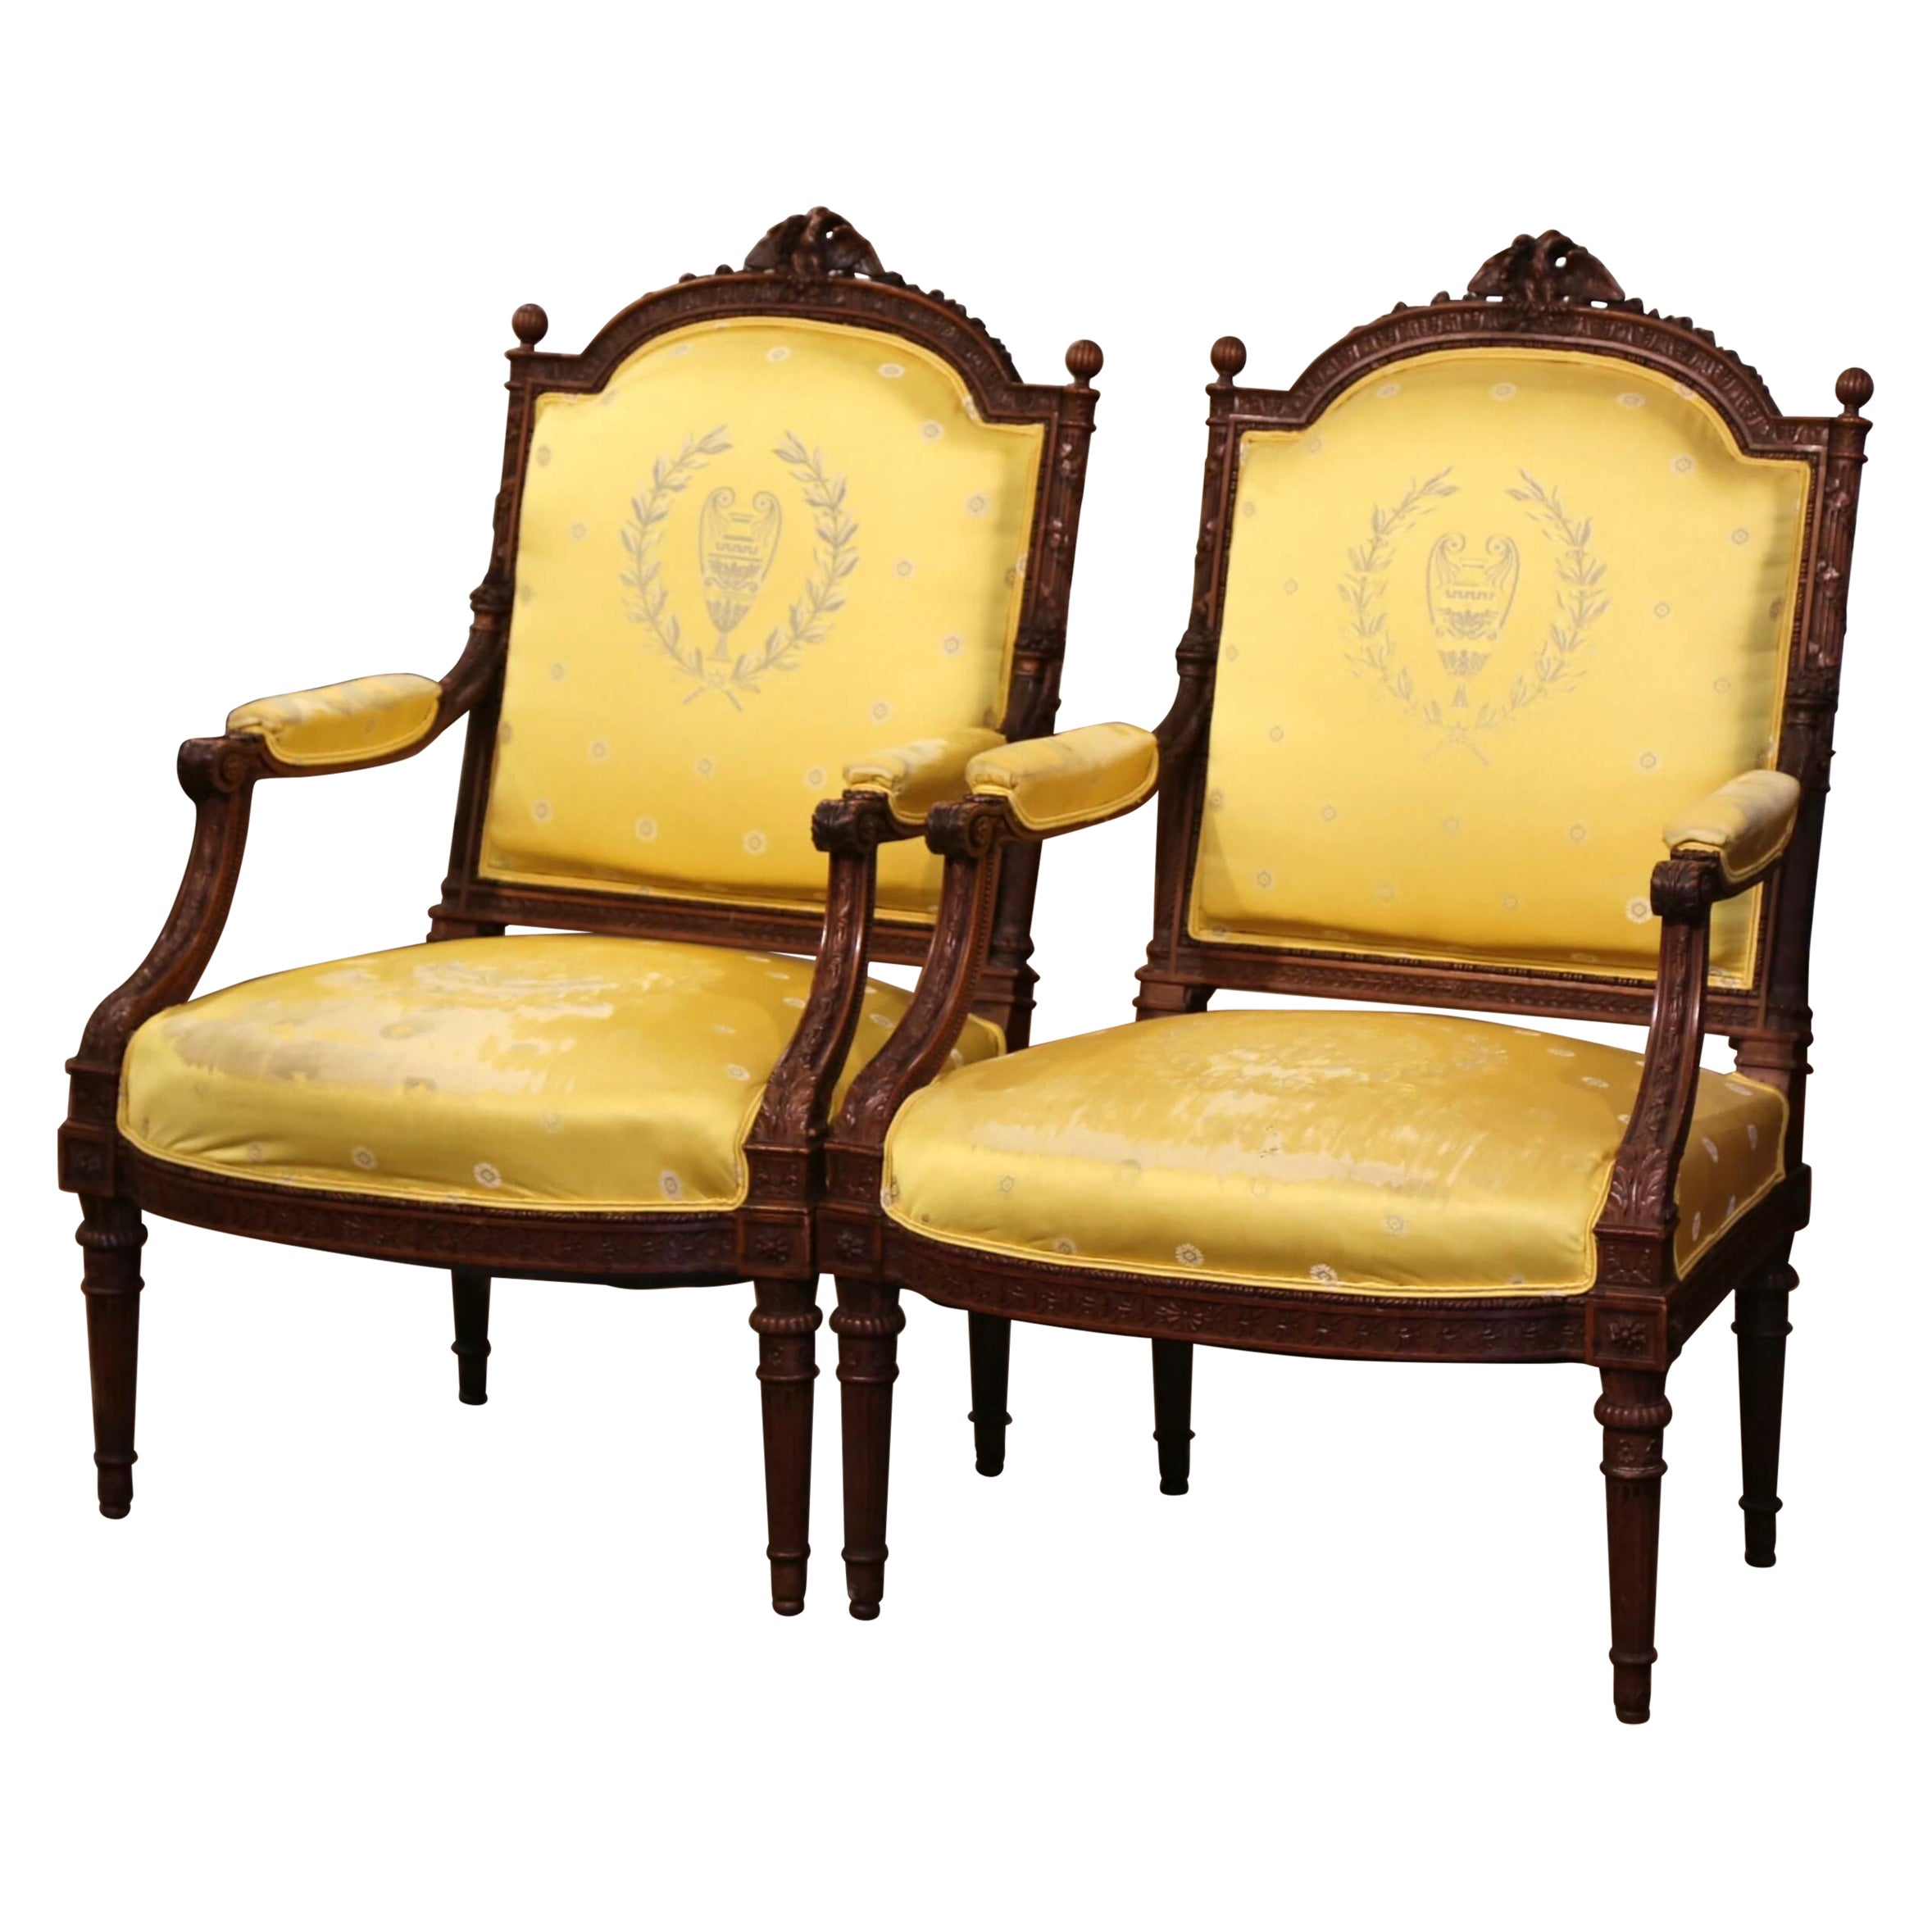 Pair of 19th Century French Louis XVI Carved Walnut Carved Fauteuils Armchairs For Sale